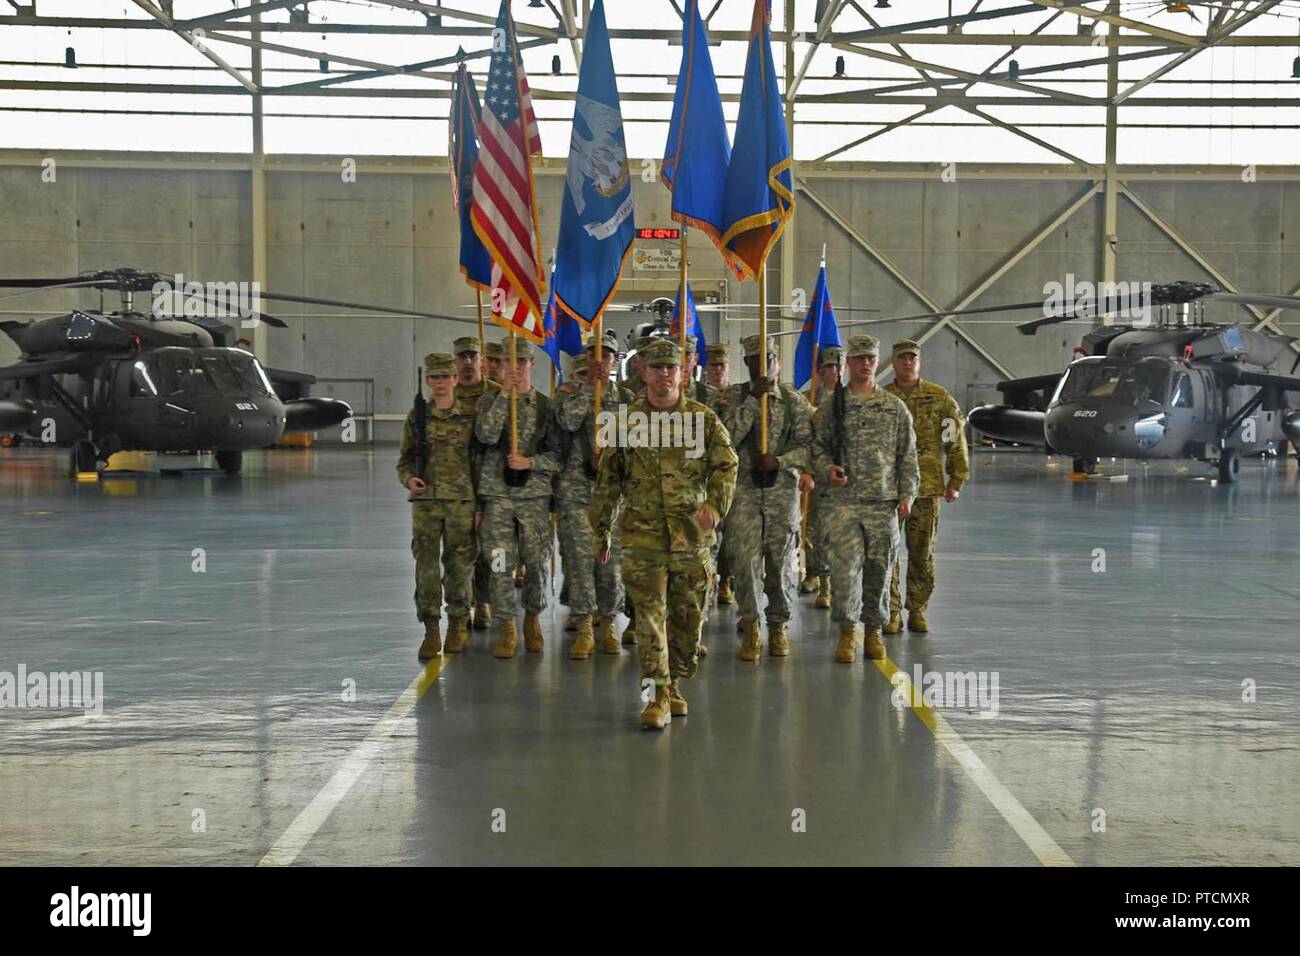 Louisiana National Guardsman Maj. Jacques Comeaux leads the State Aviation Command colors forward during an official change of command and promotion ceremony at Army Aviation Facility #1 in Hammond, Louisiana, July 9, 2017. During the ceremony, Brig. Gen. Patrick Bossetta was pinned with the one-star rank after relinquishing command of the State Aviation Command to Col. John Plunkett and command of the 204th Theater Airfield Operations Group to Lt. Col. John Bonnette. Stock Photo